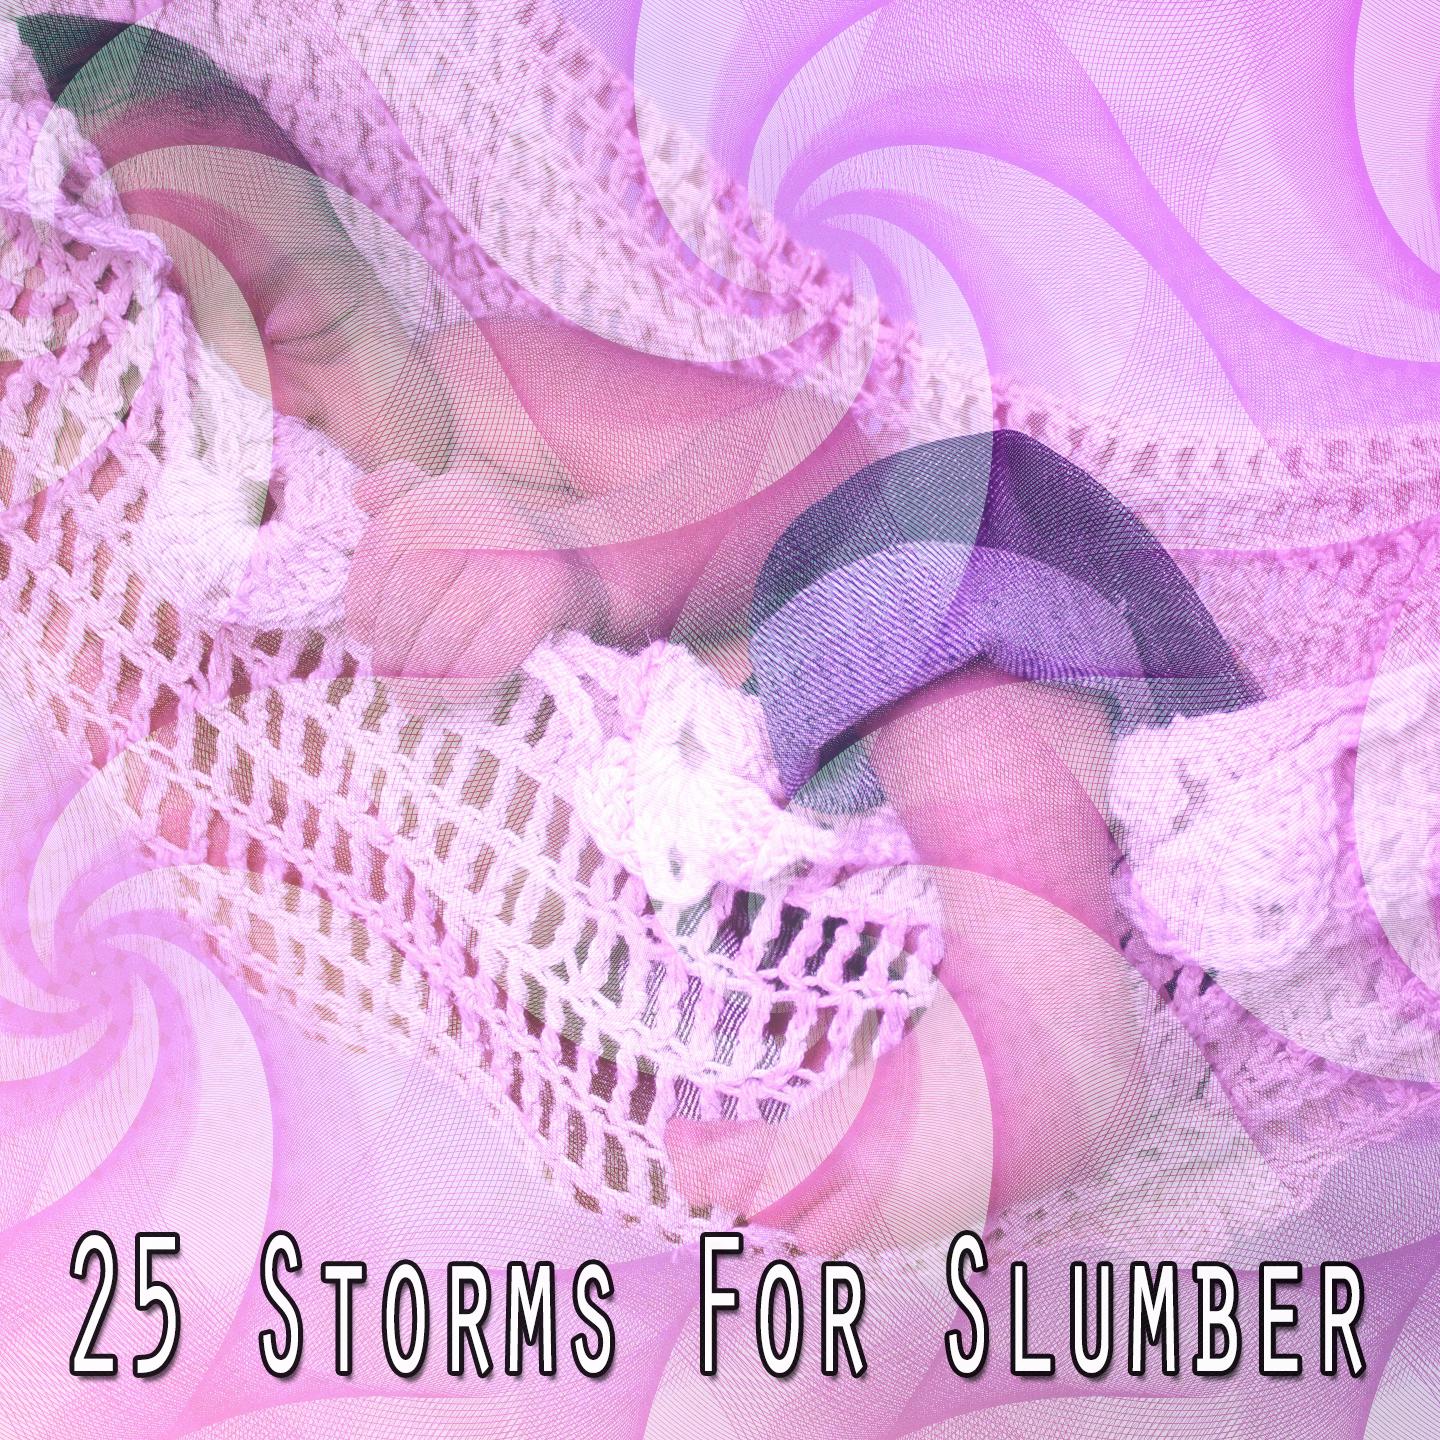 25 Storms For Slumber